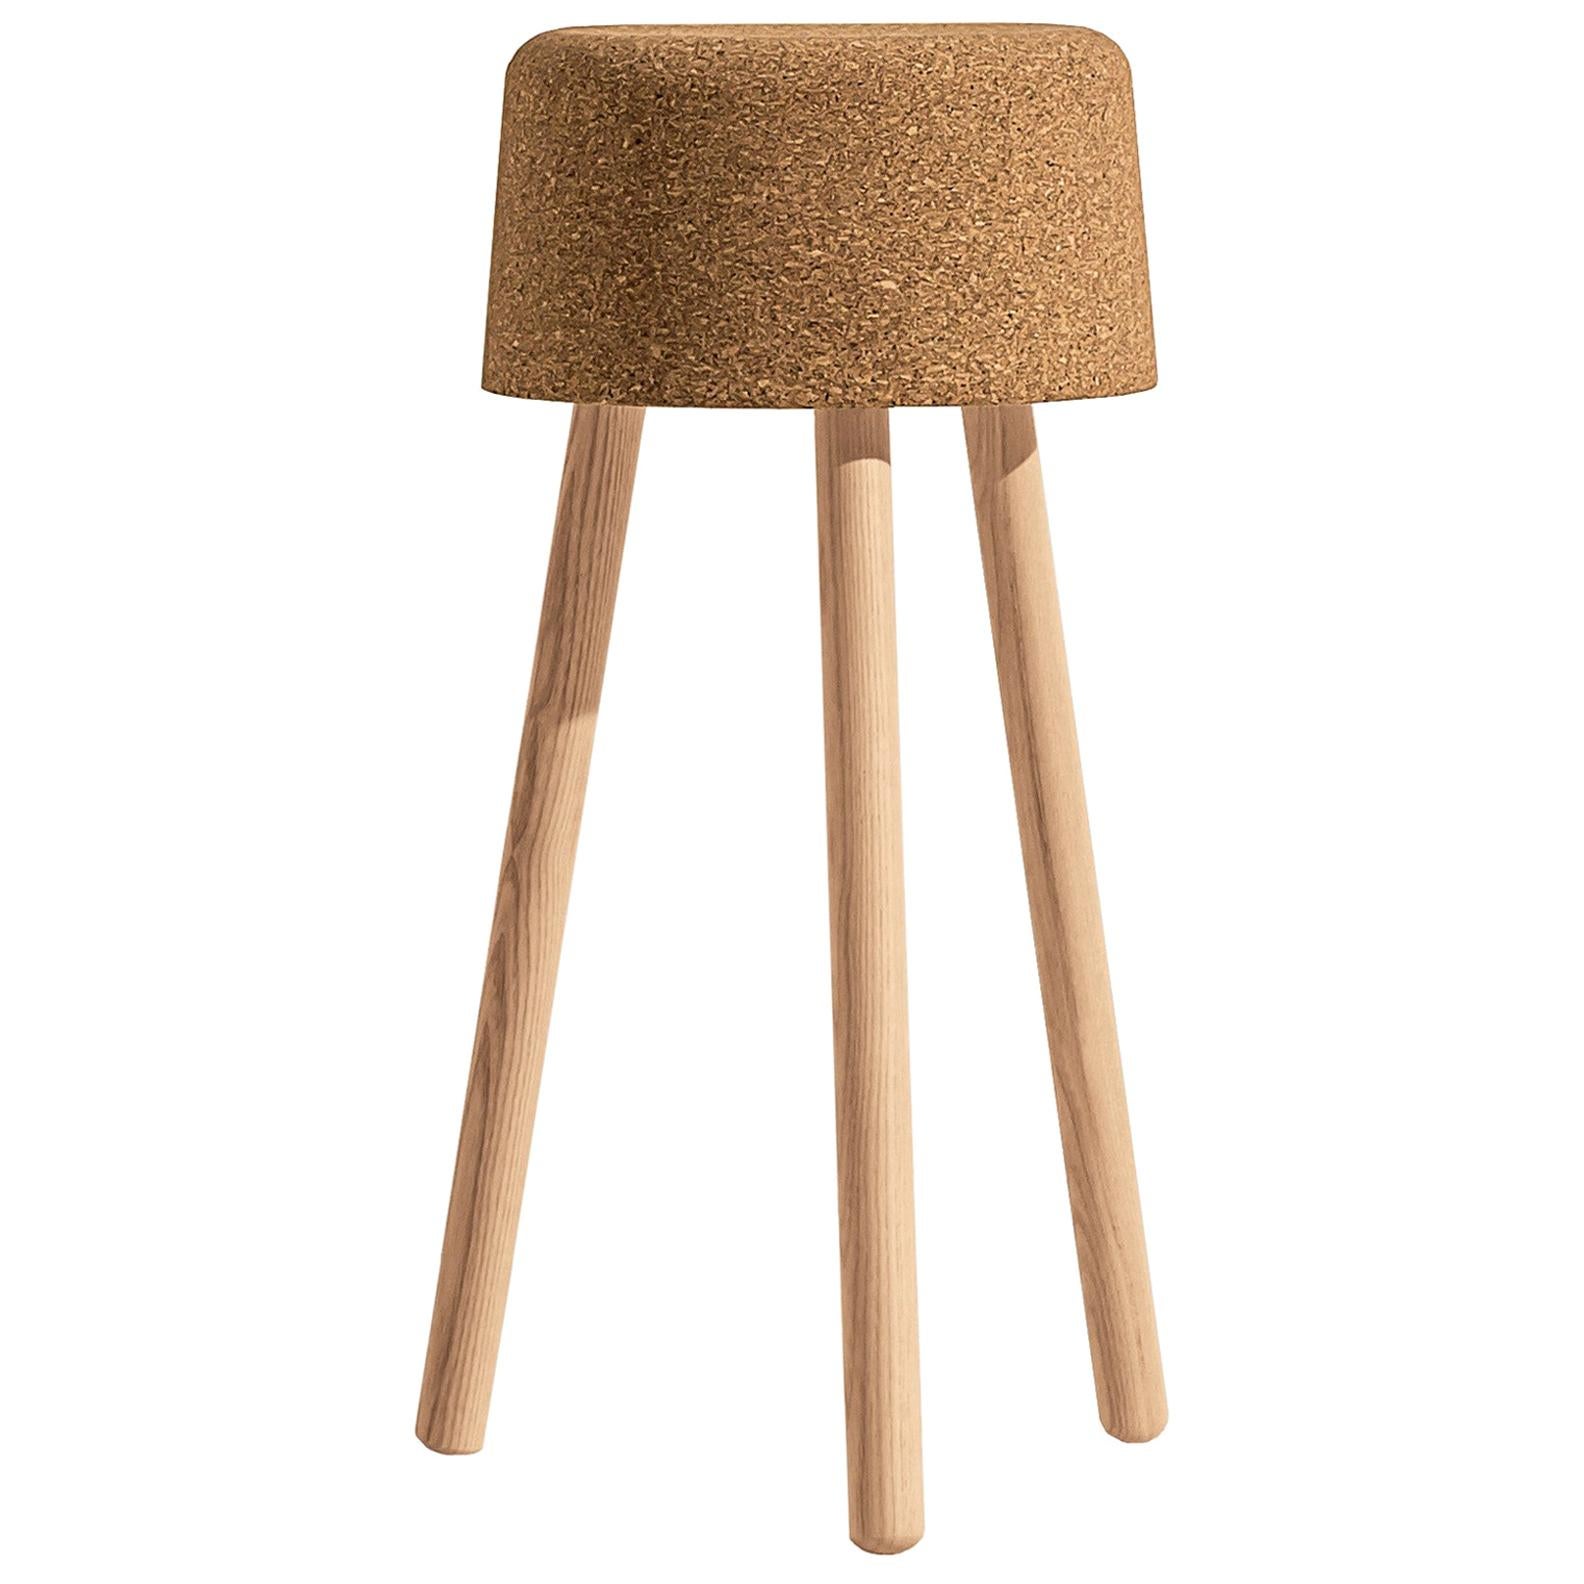 Bombetta Stool Medium, with Ash Legs and Natural Cork Seat by Discipline Lab For Sale